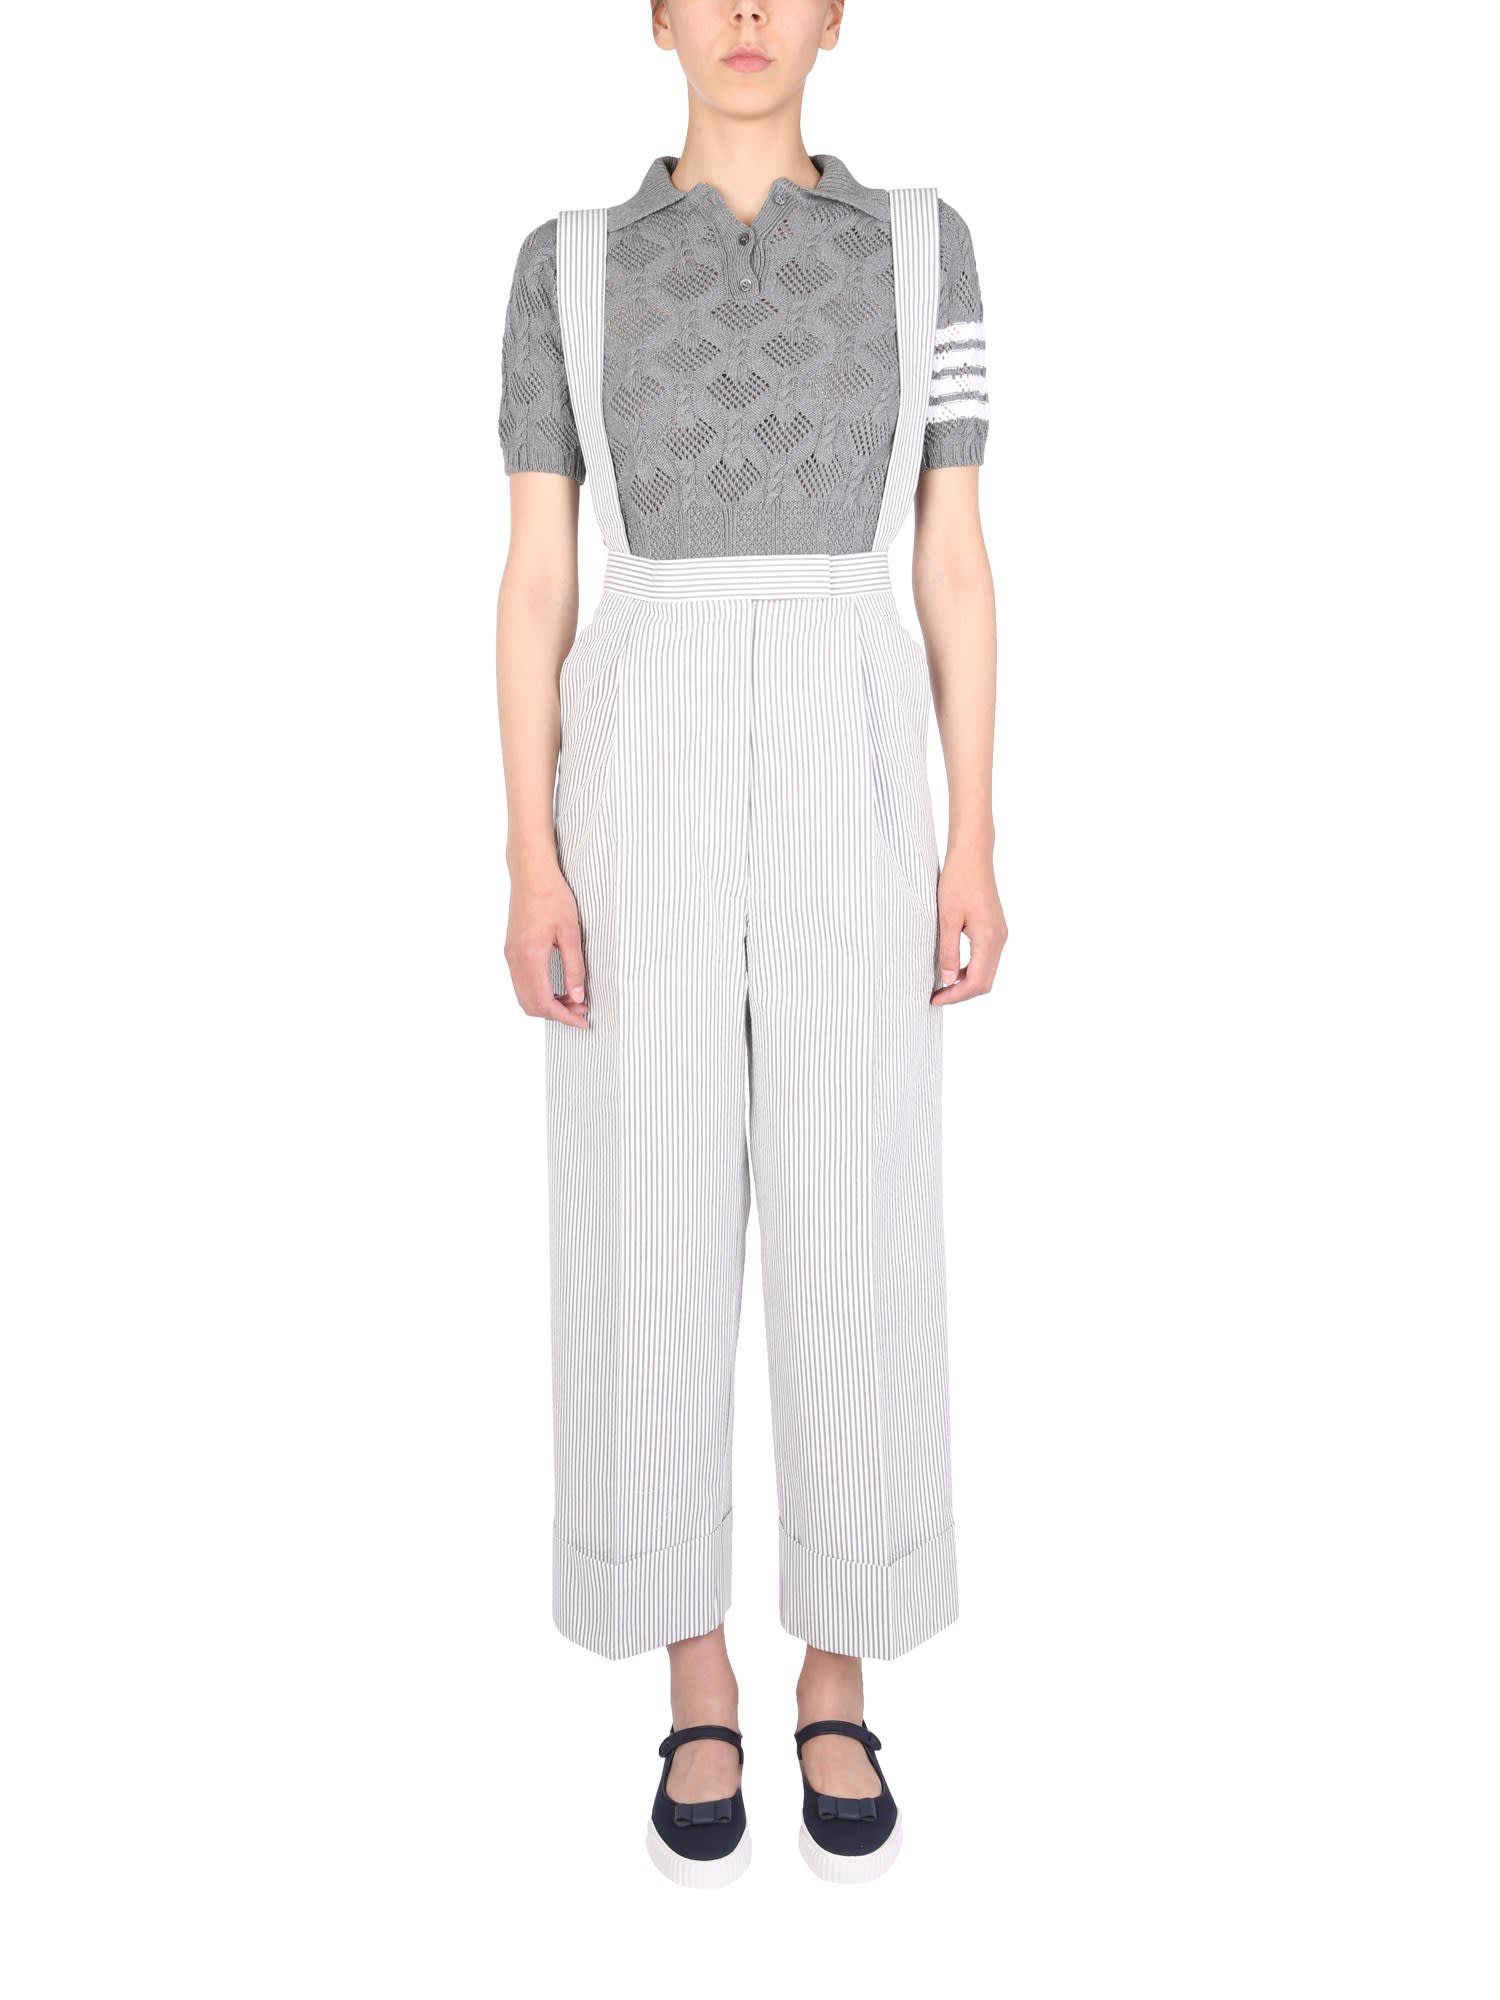 THOM BROWNE THOM BROWNE TROUSERS WITH SEERSUCKER PATTERN AND BRACES,FTC399H 00572035